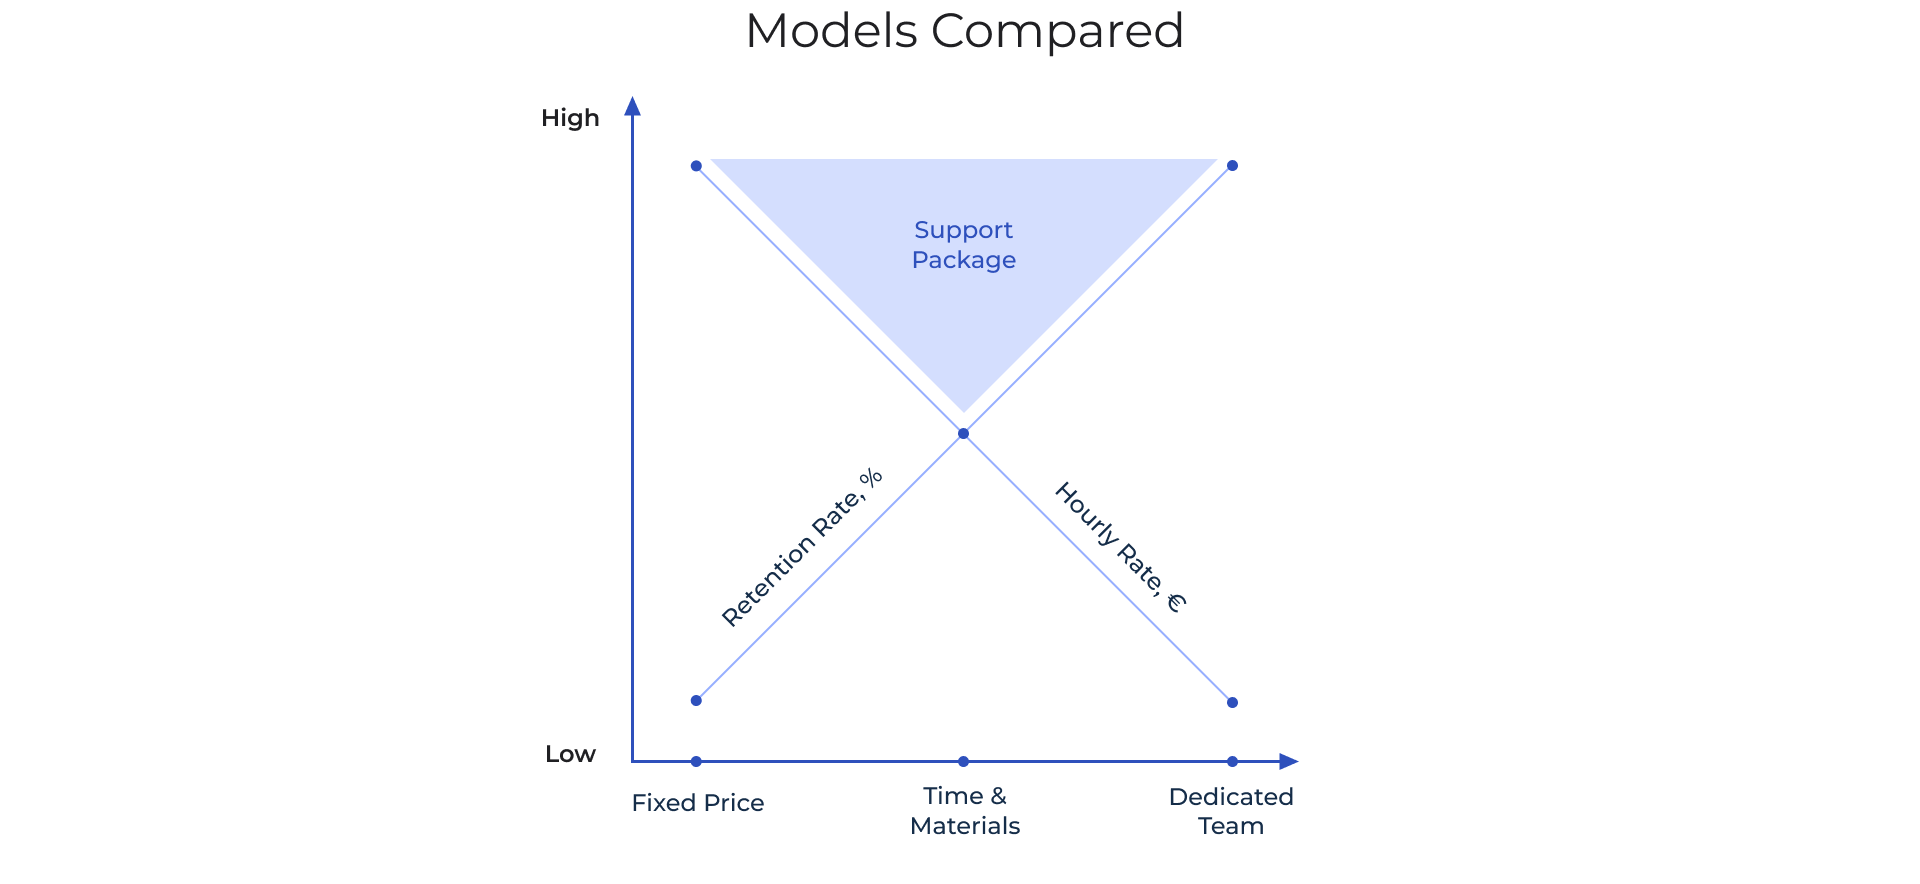 Cooperation models compared